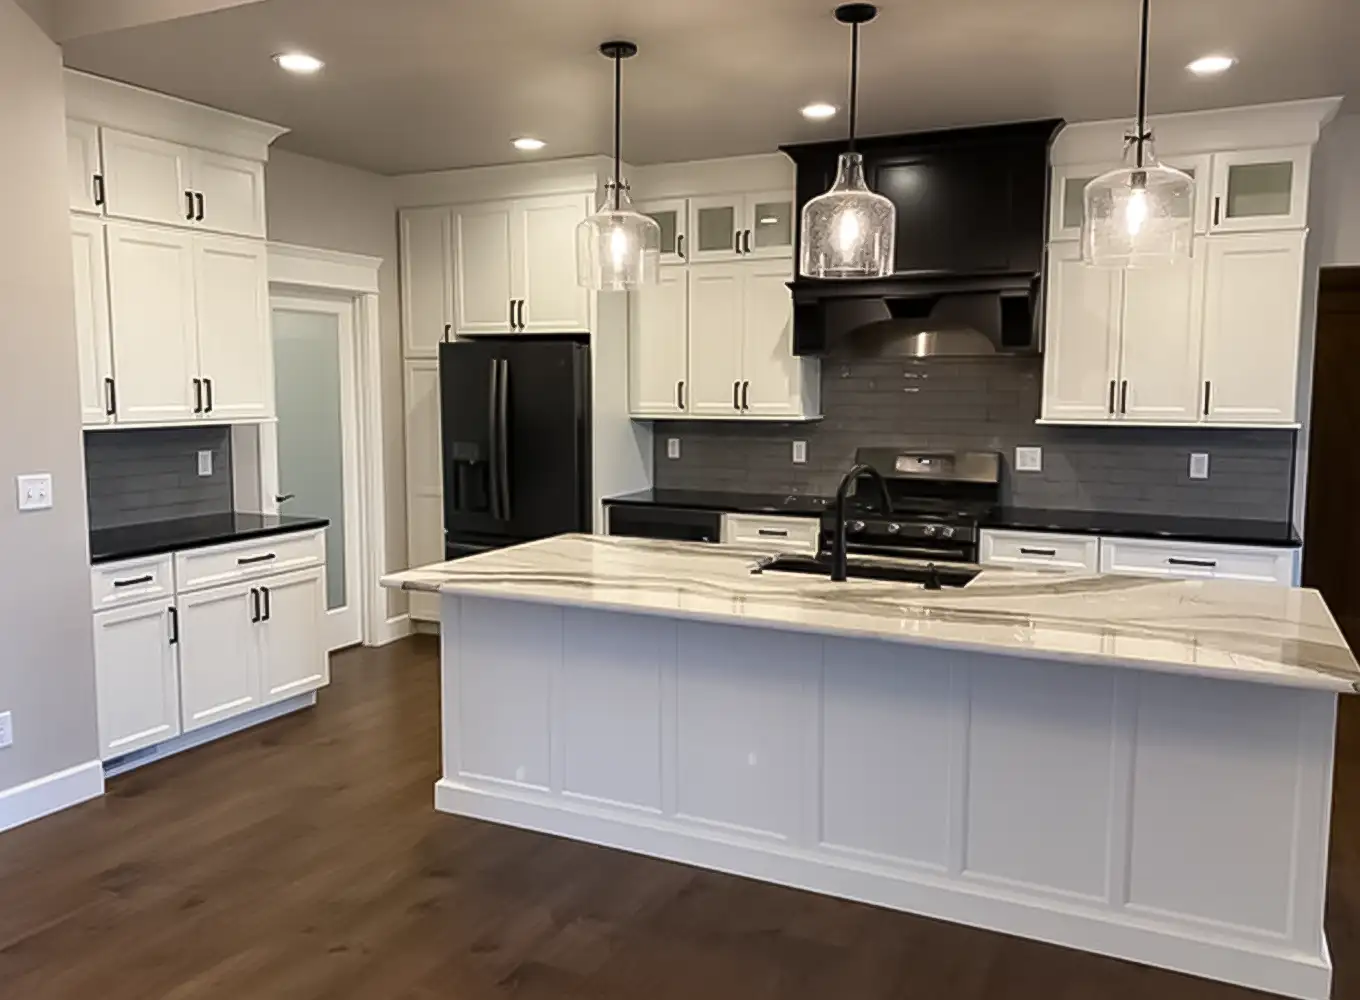 kitchen of a new home built near highland illinois